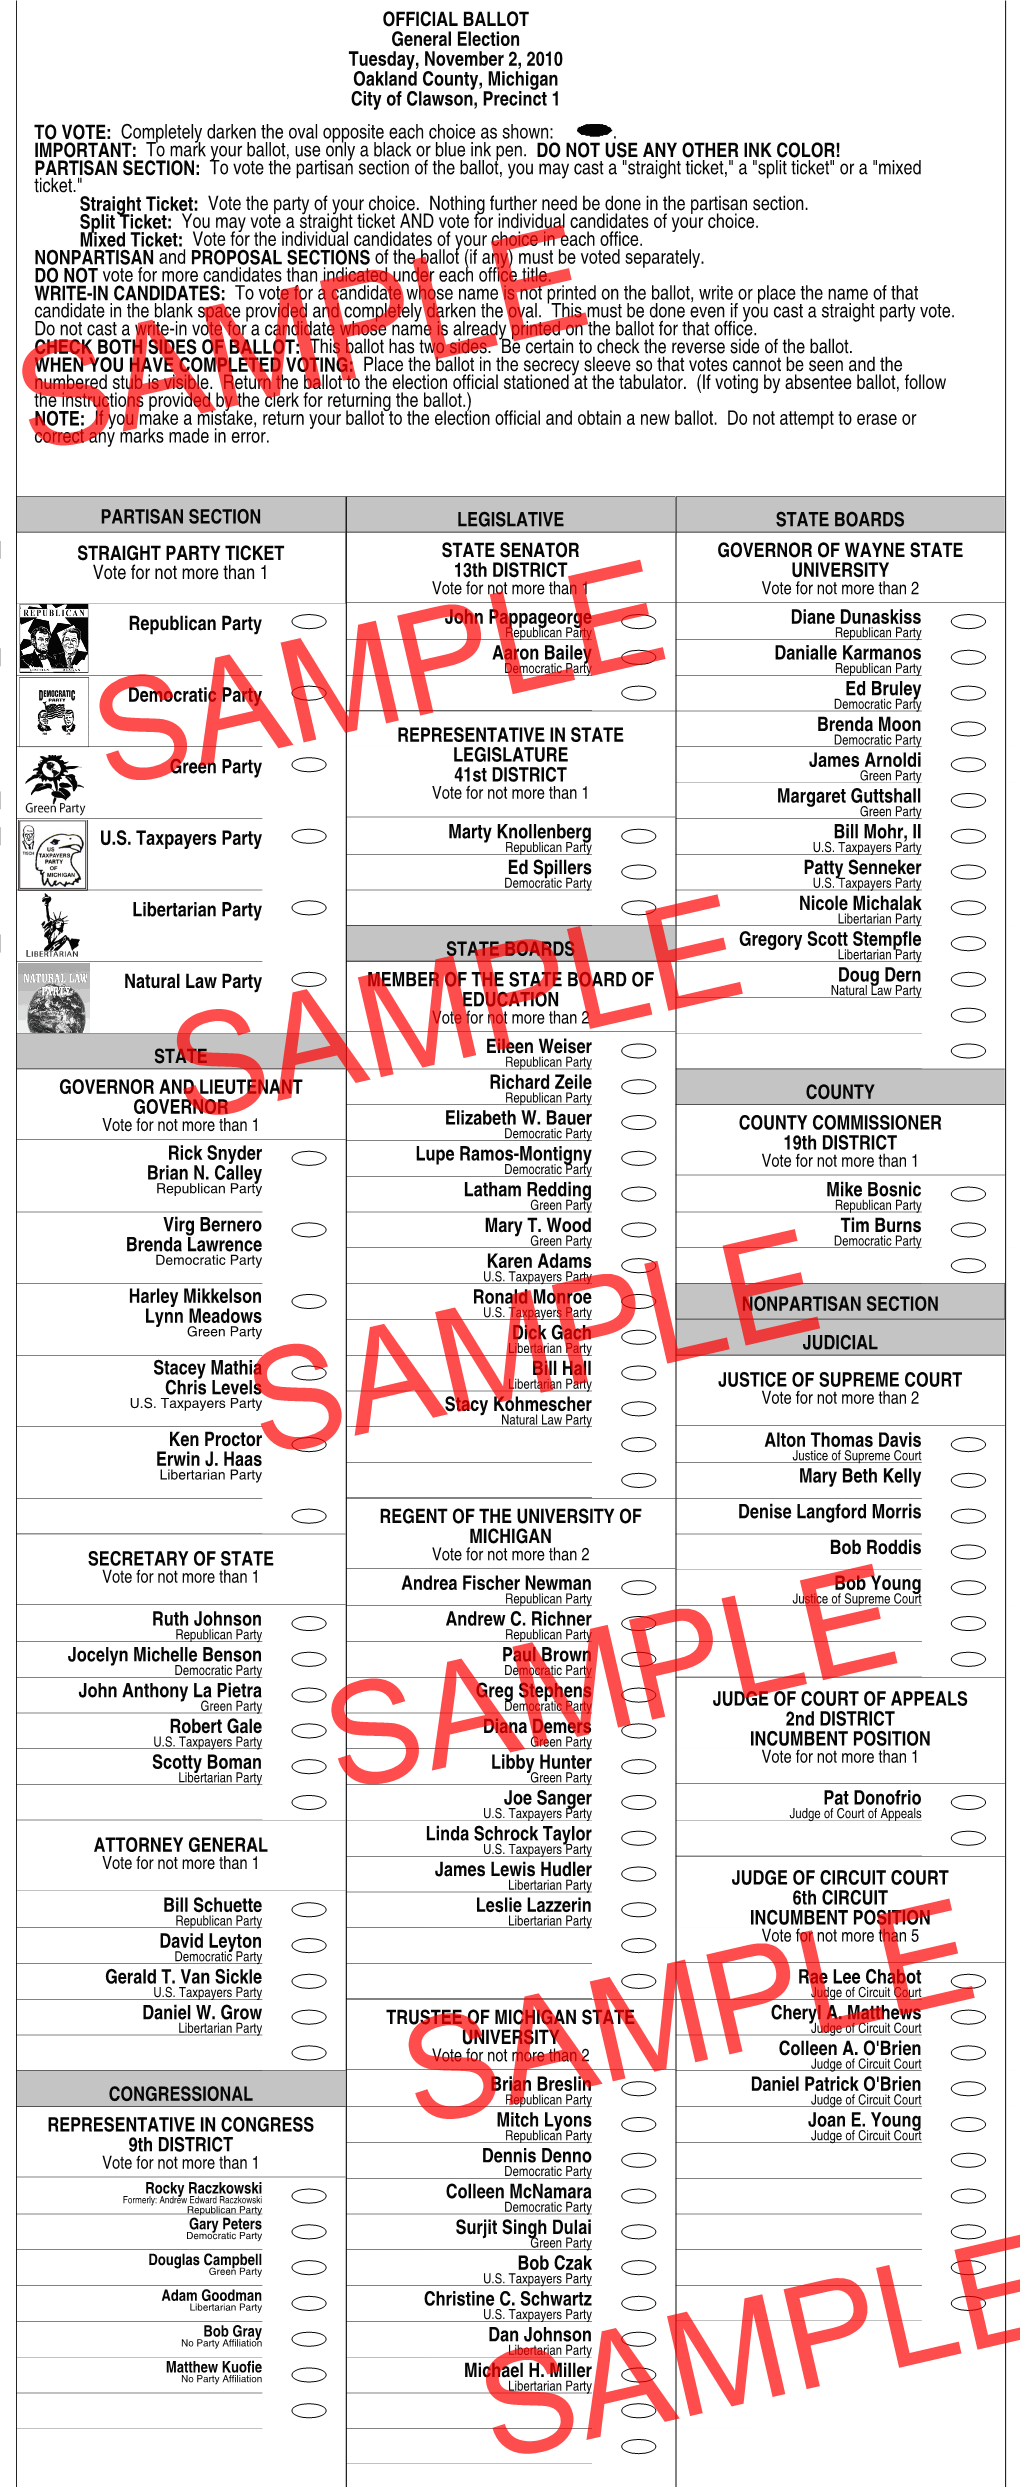 OFFICIAL BALLOT General Election Tuesday, November 2, 2010 Oakland County, Michigan City of Clawson, Precinct 1 to VOTE: Comple